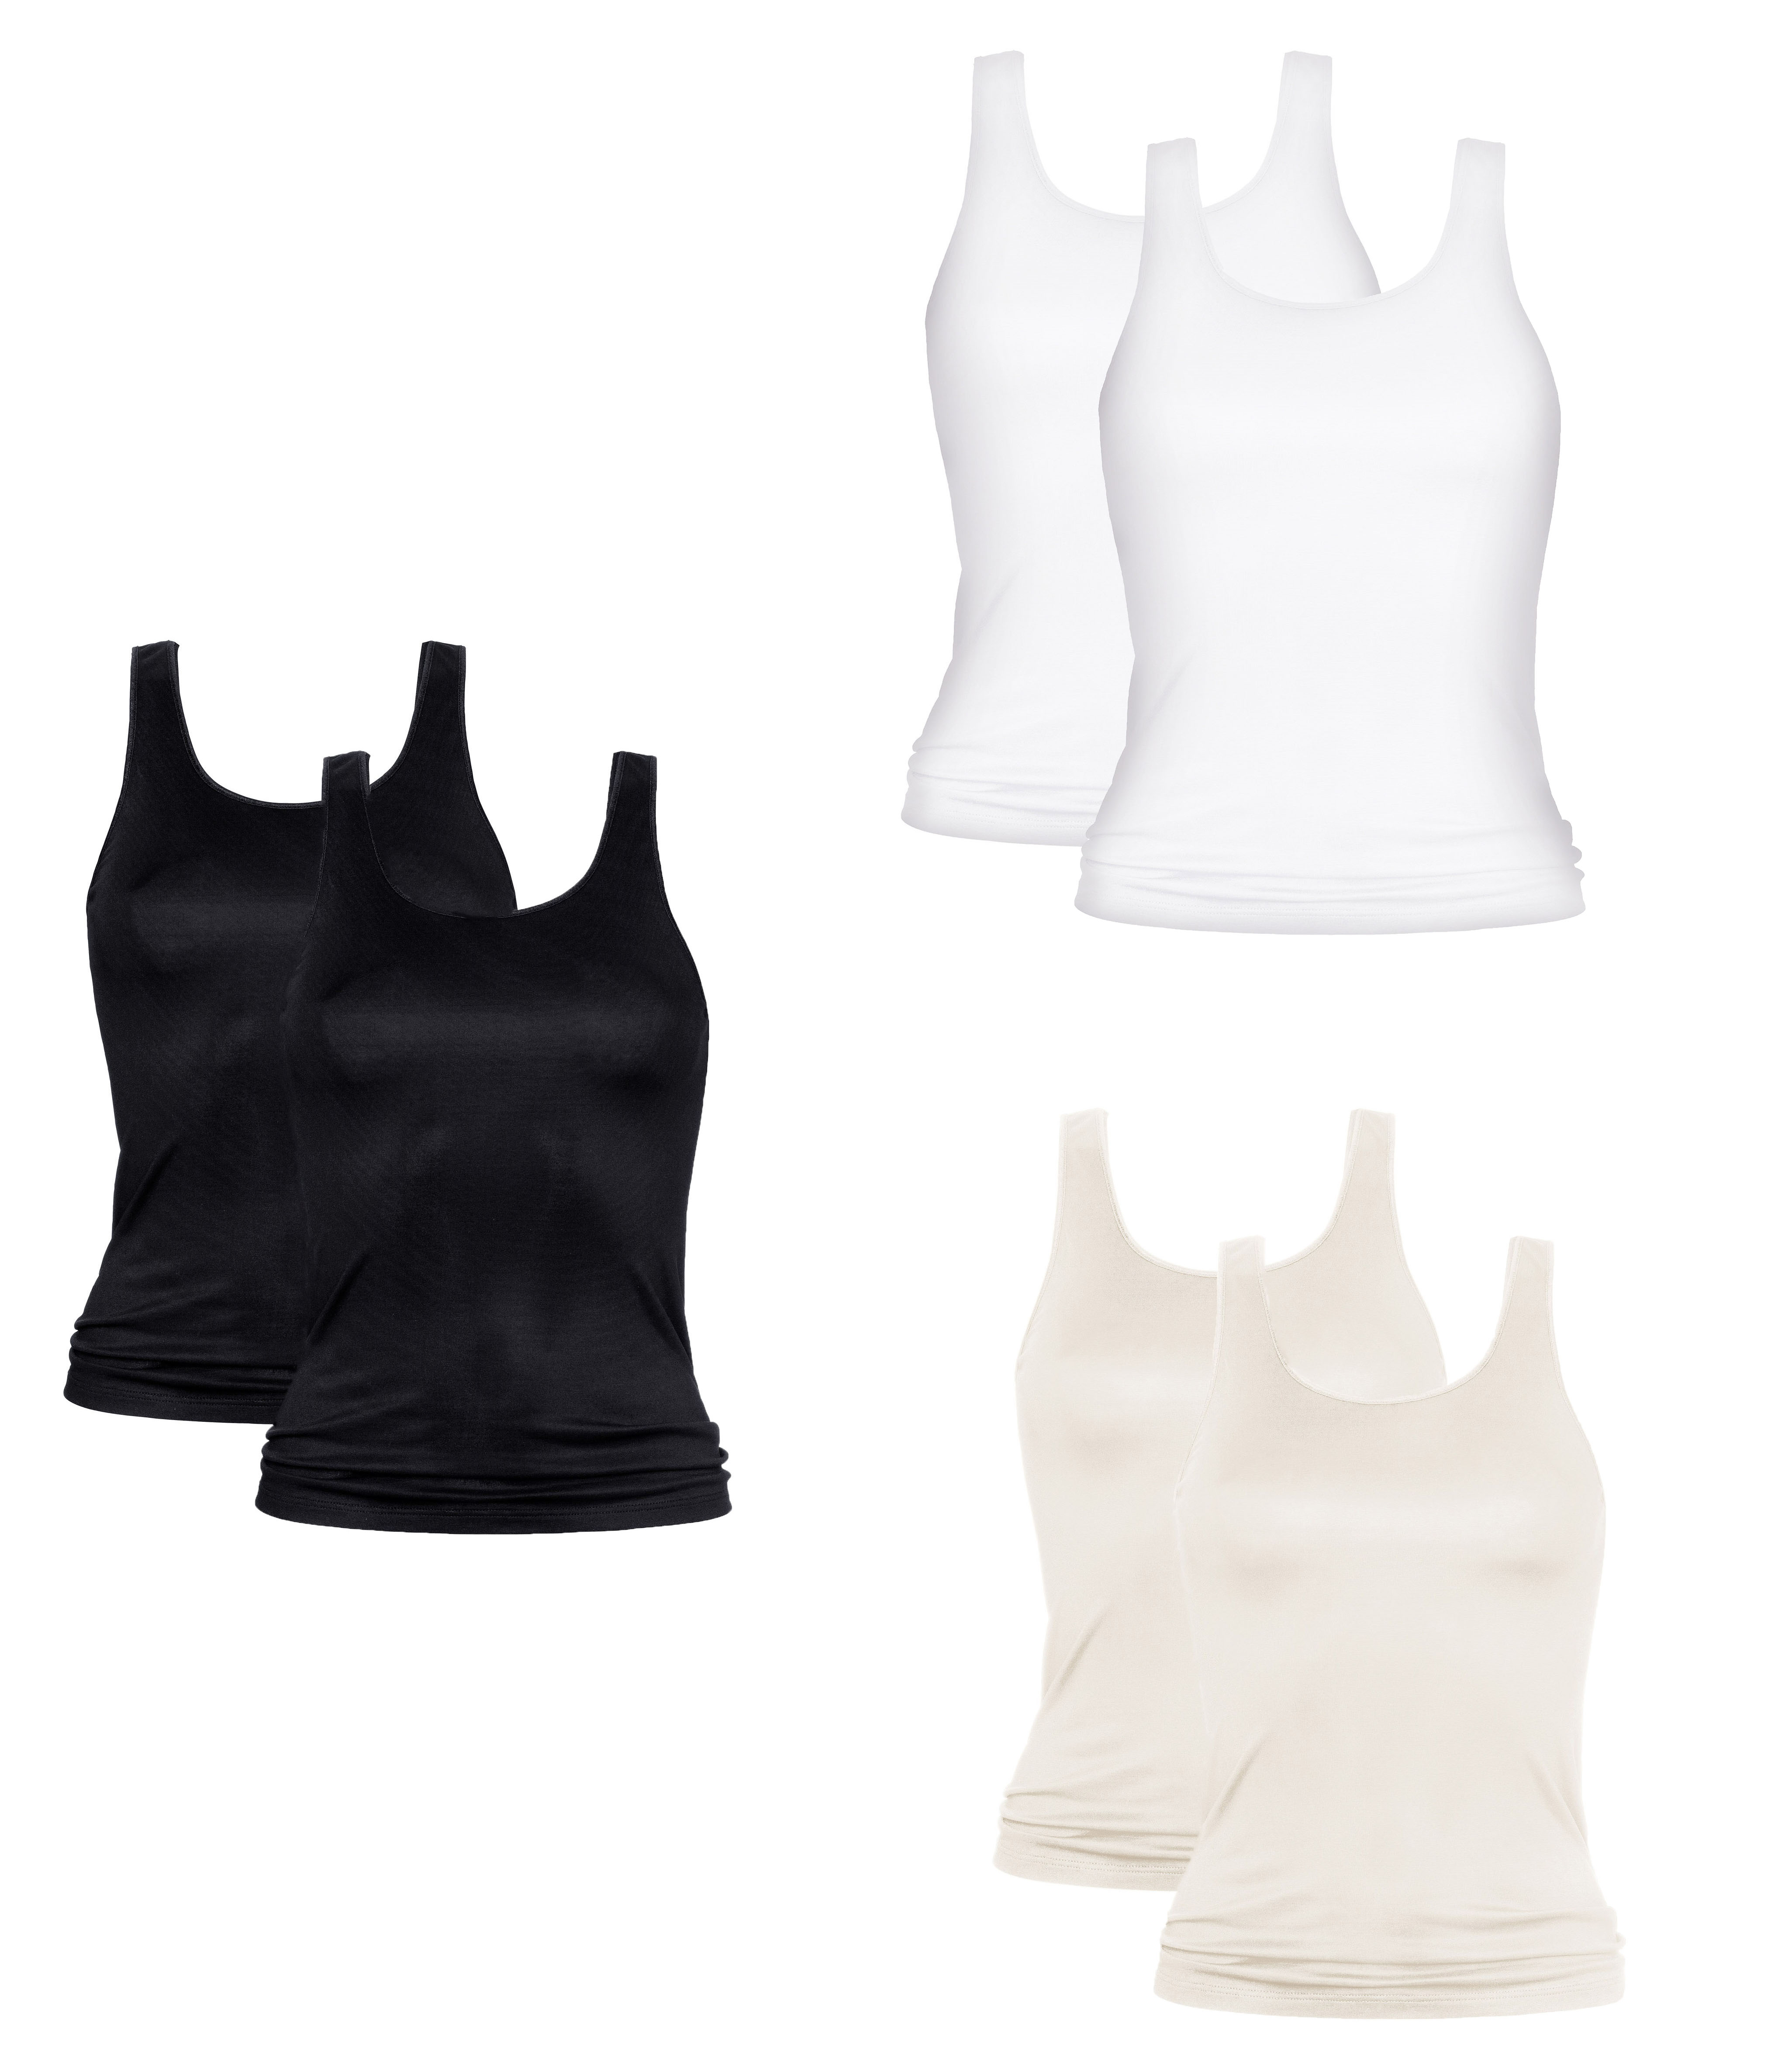 2 Basic Vests Undershirts with Double Straps Women Colour: white, champagne  and black Sizes: 38-48